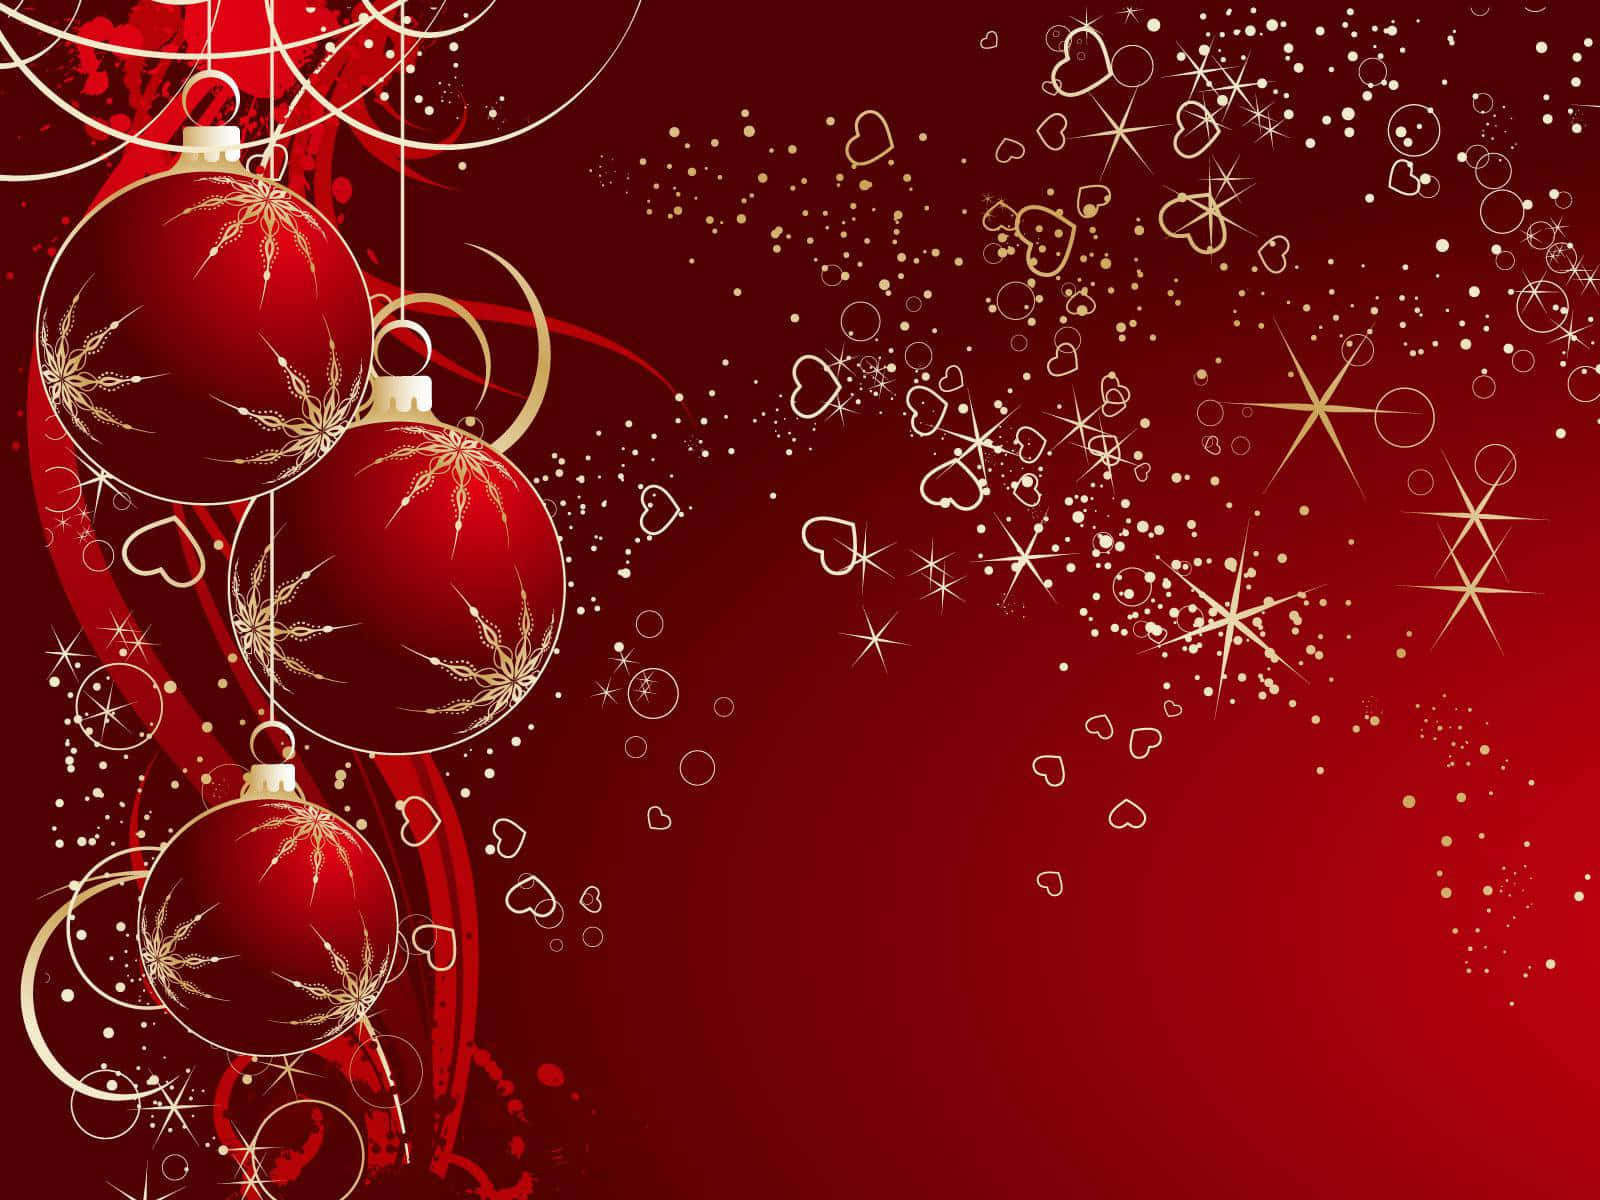 Get In The Festive and Joyful Spirit with this High-Resolution Christmas Background